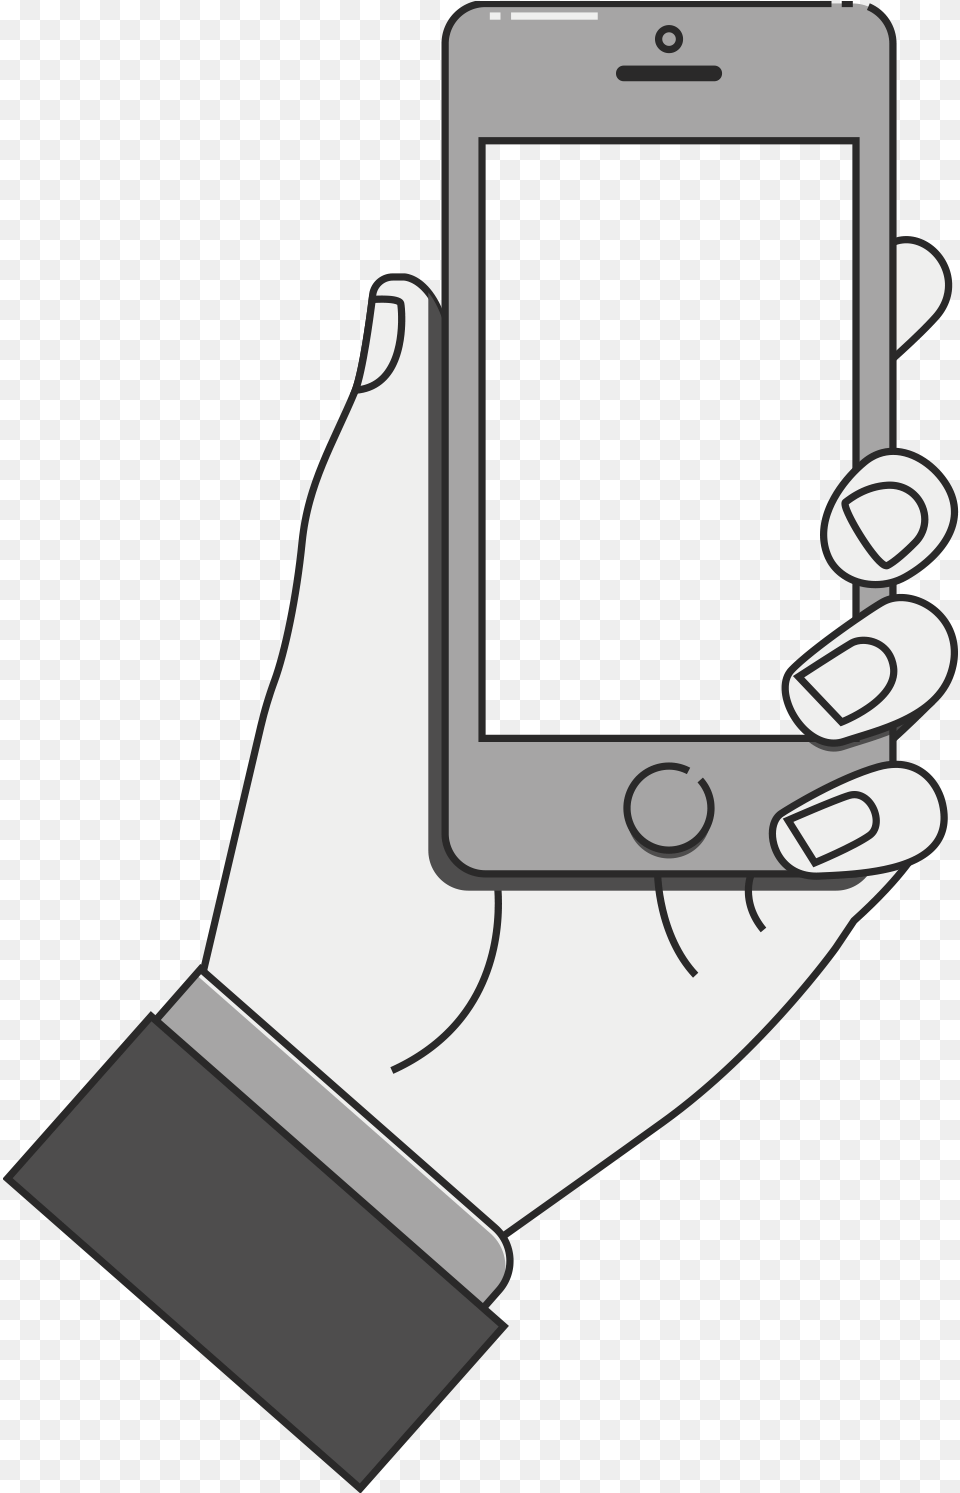 An Illustration Of A Hand Holding A Phone Displaying, Electronics, Mobile Phone, Computer, Hand-held Computer Free Png Download